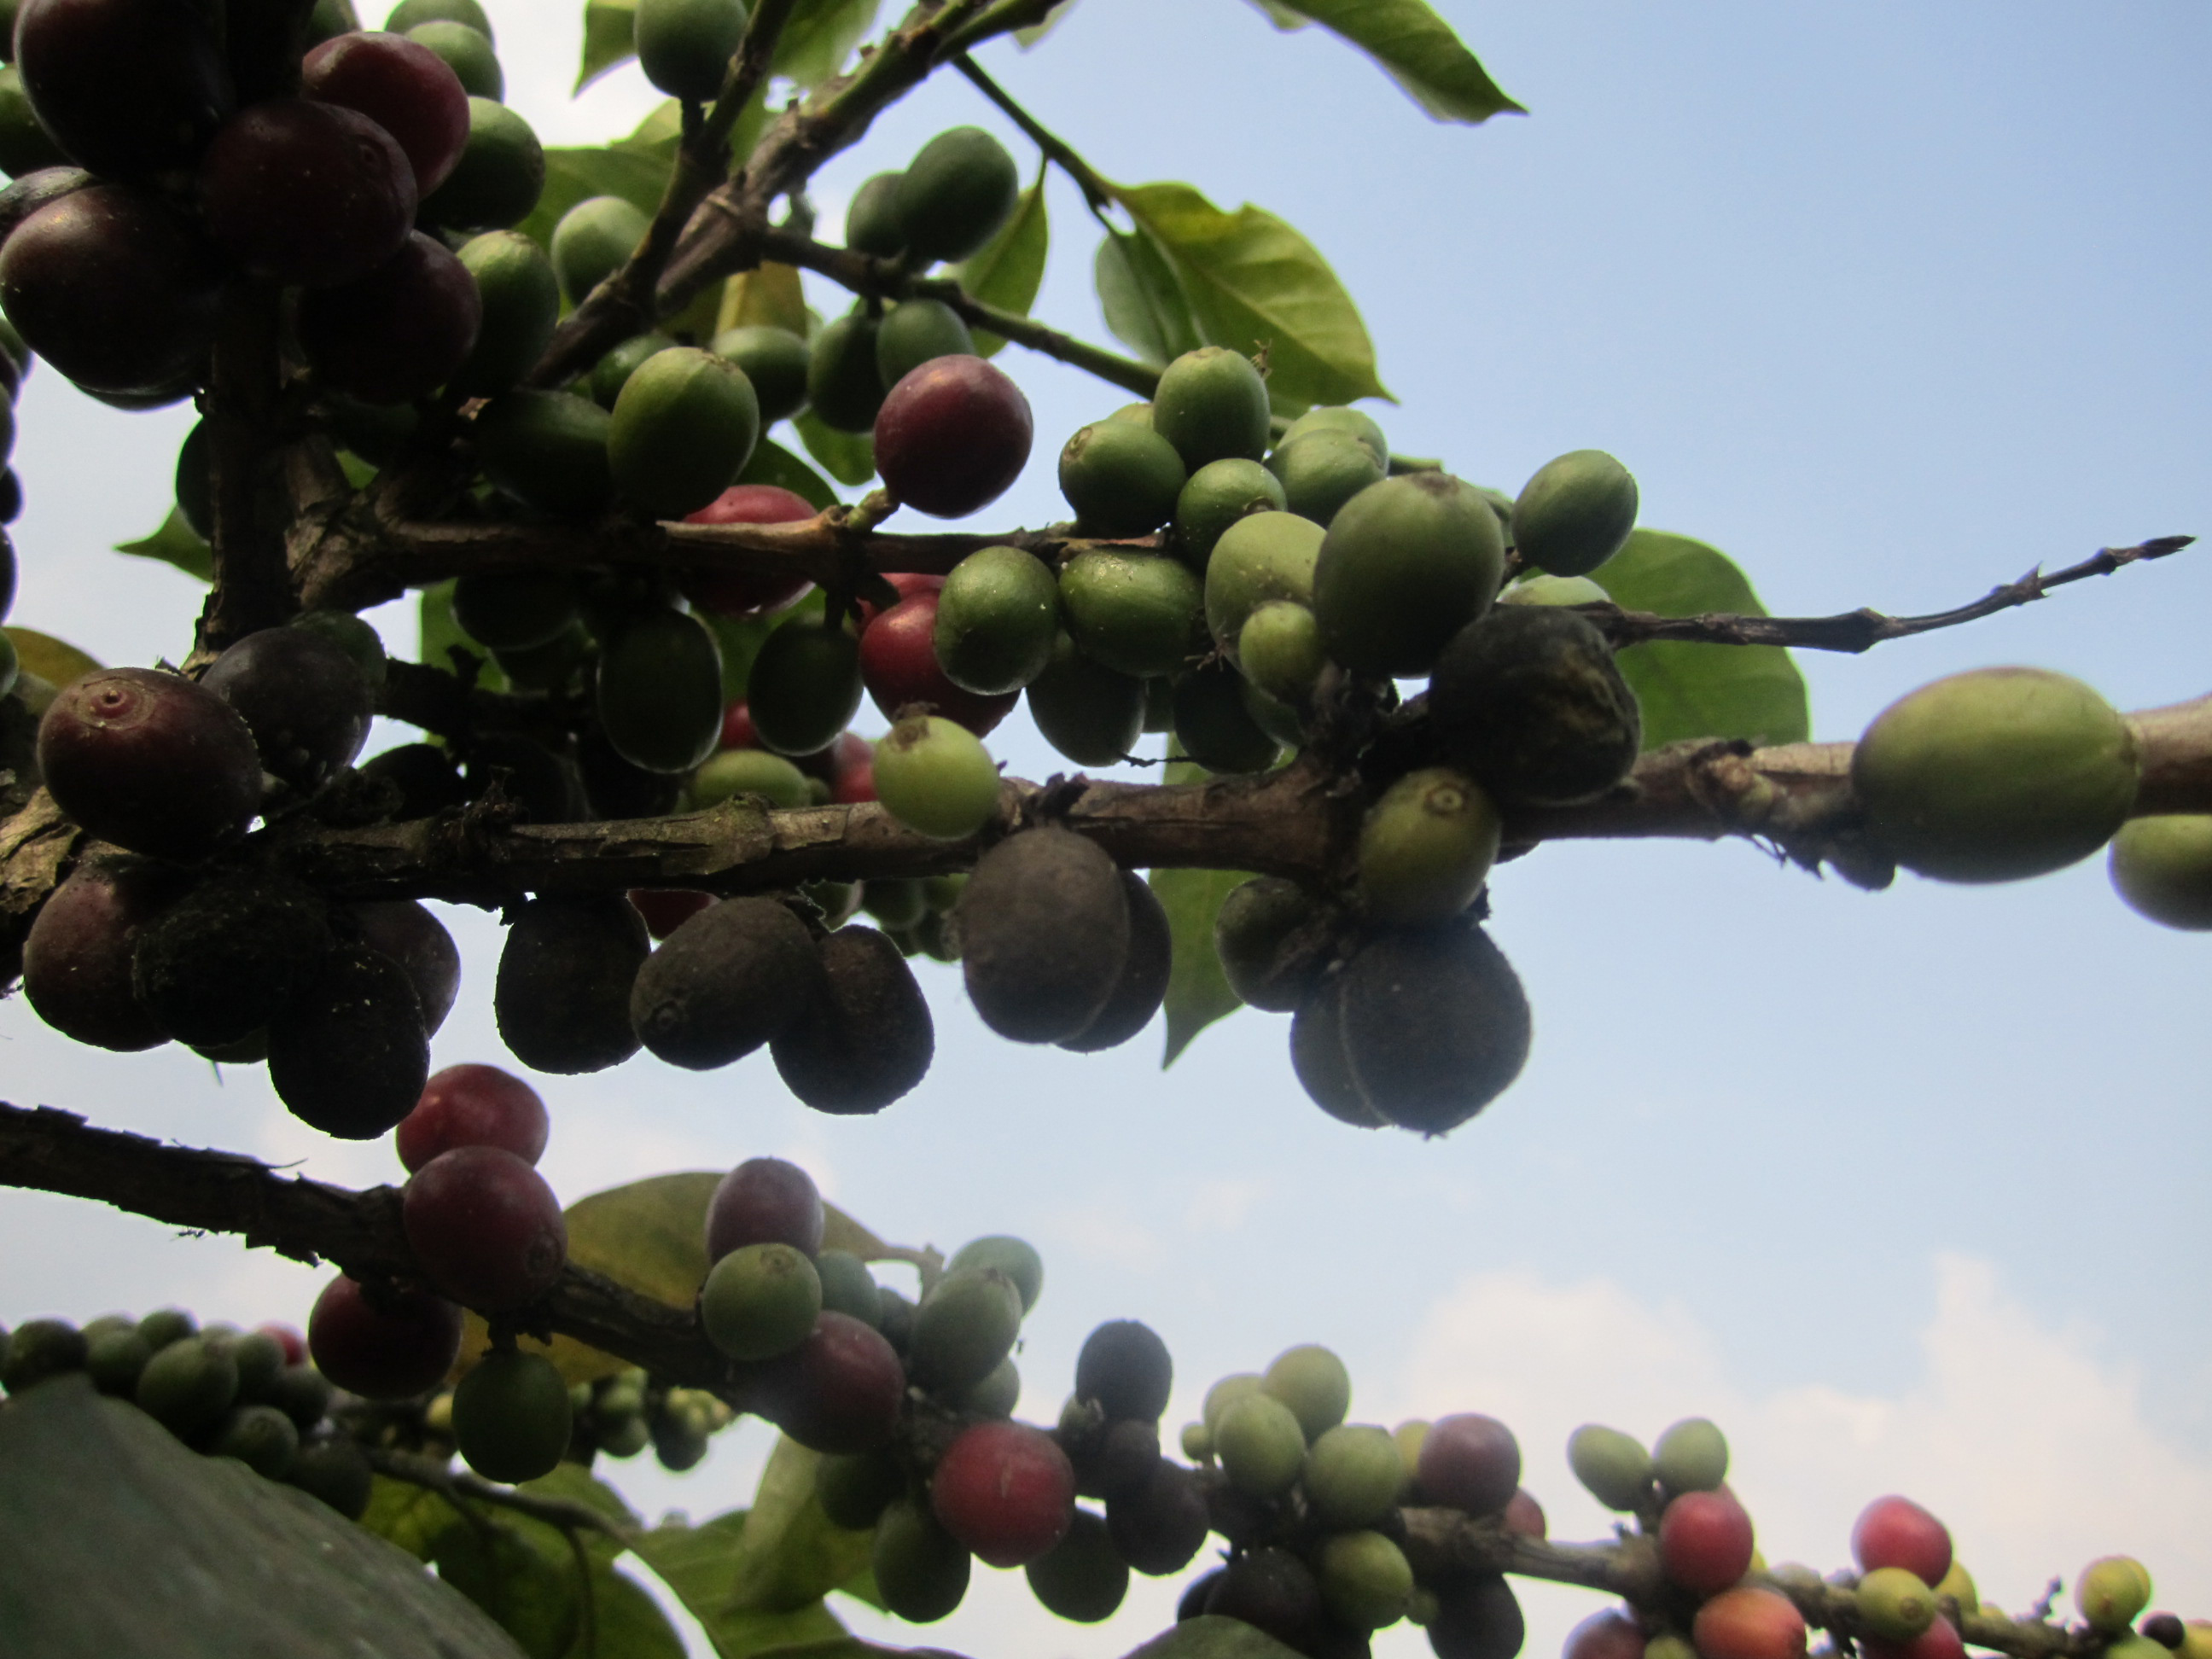 Gorilla Conservation Coffee - cherries ripening on the tree